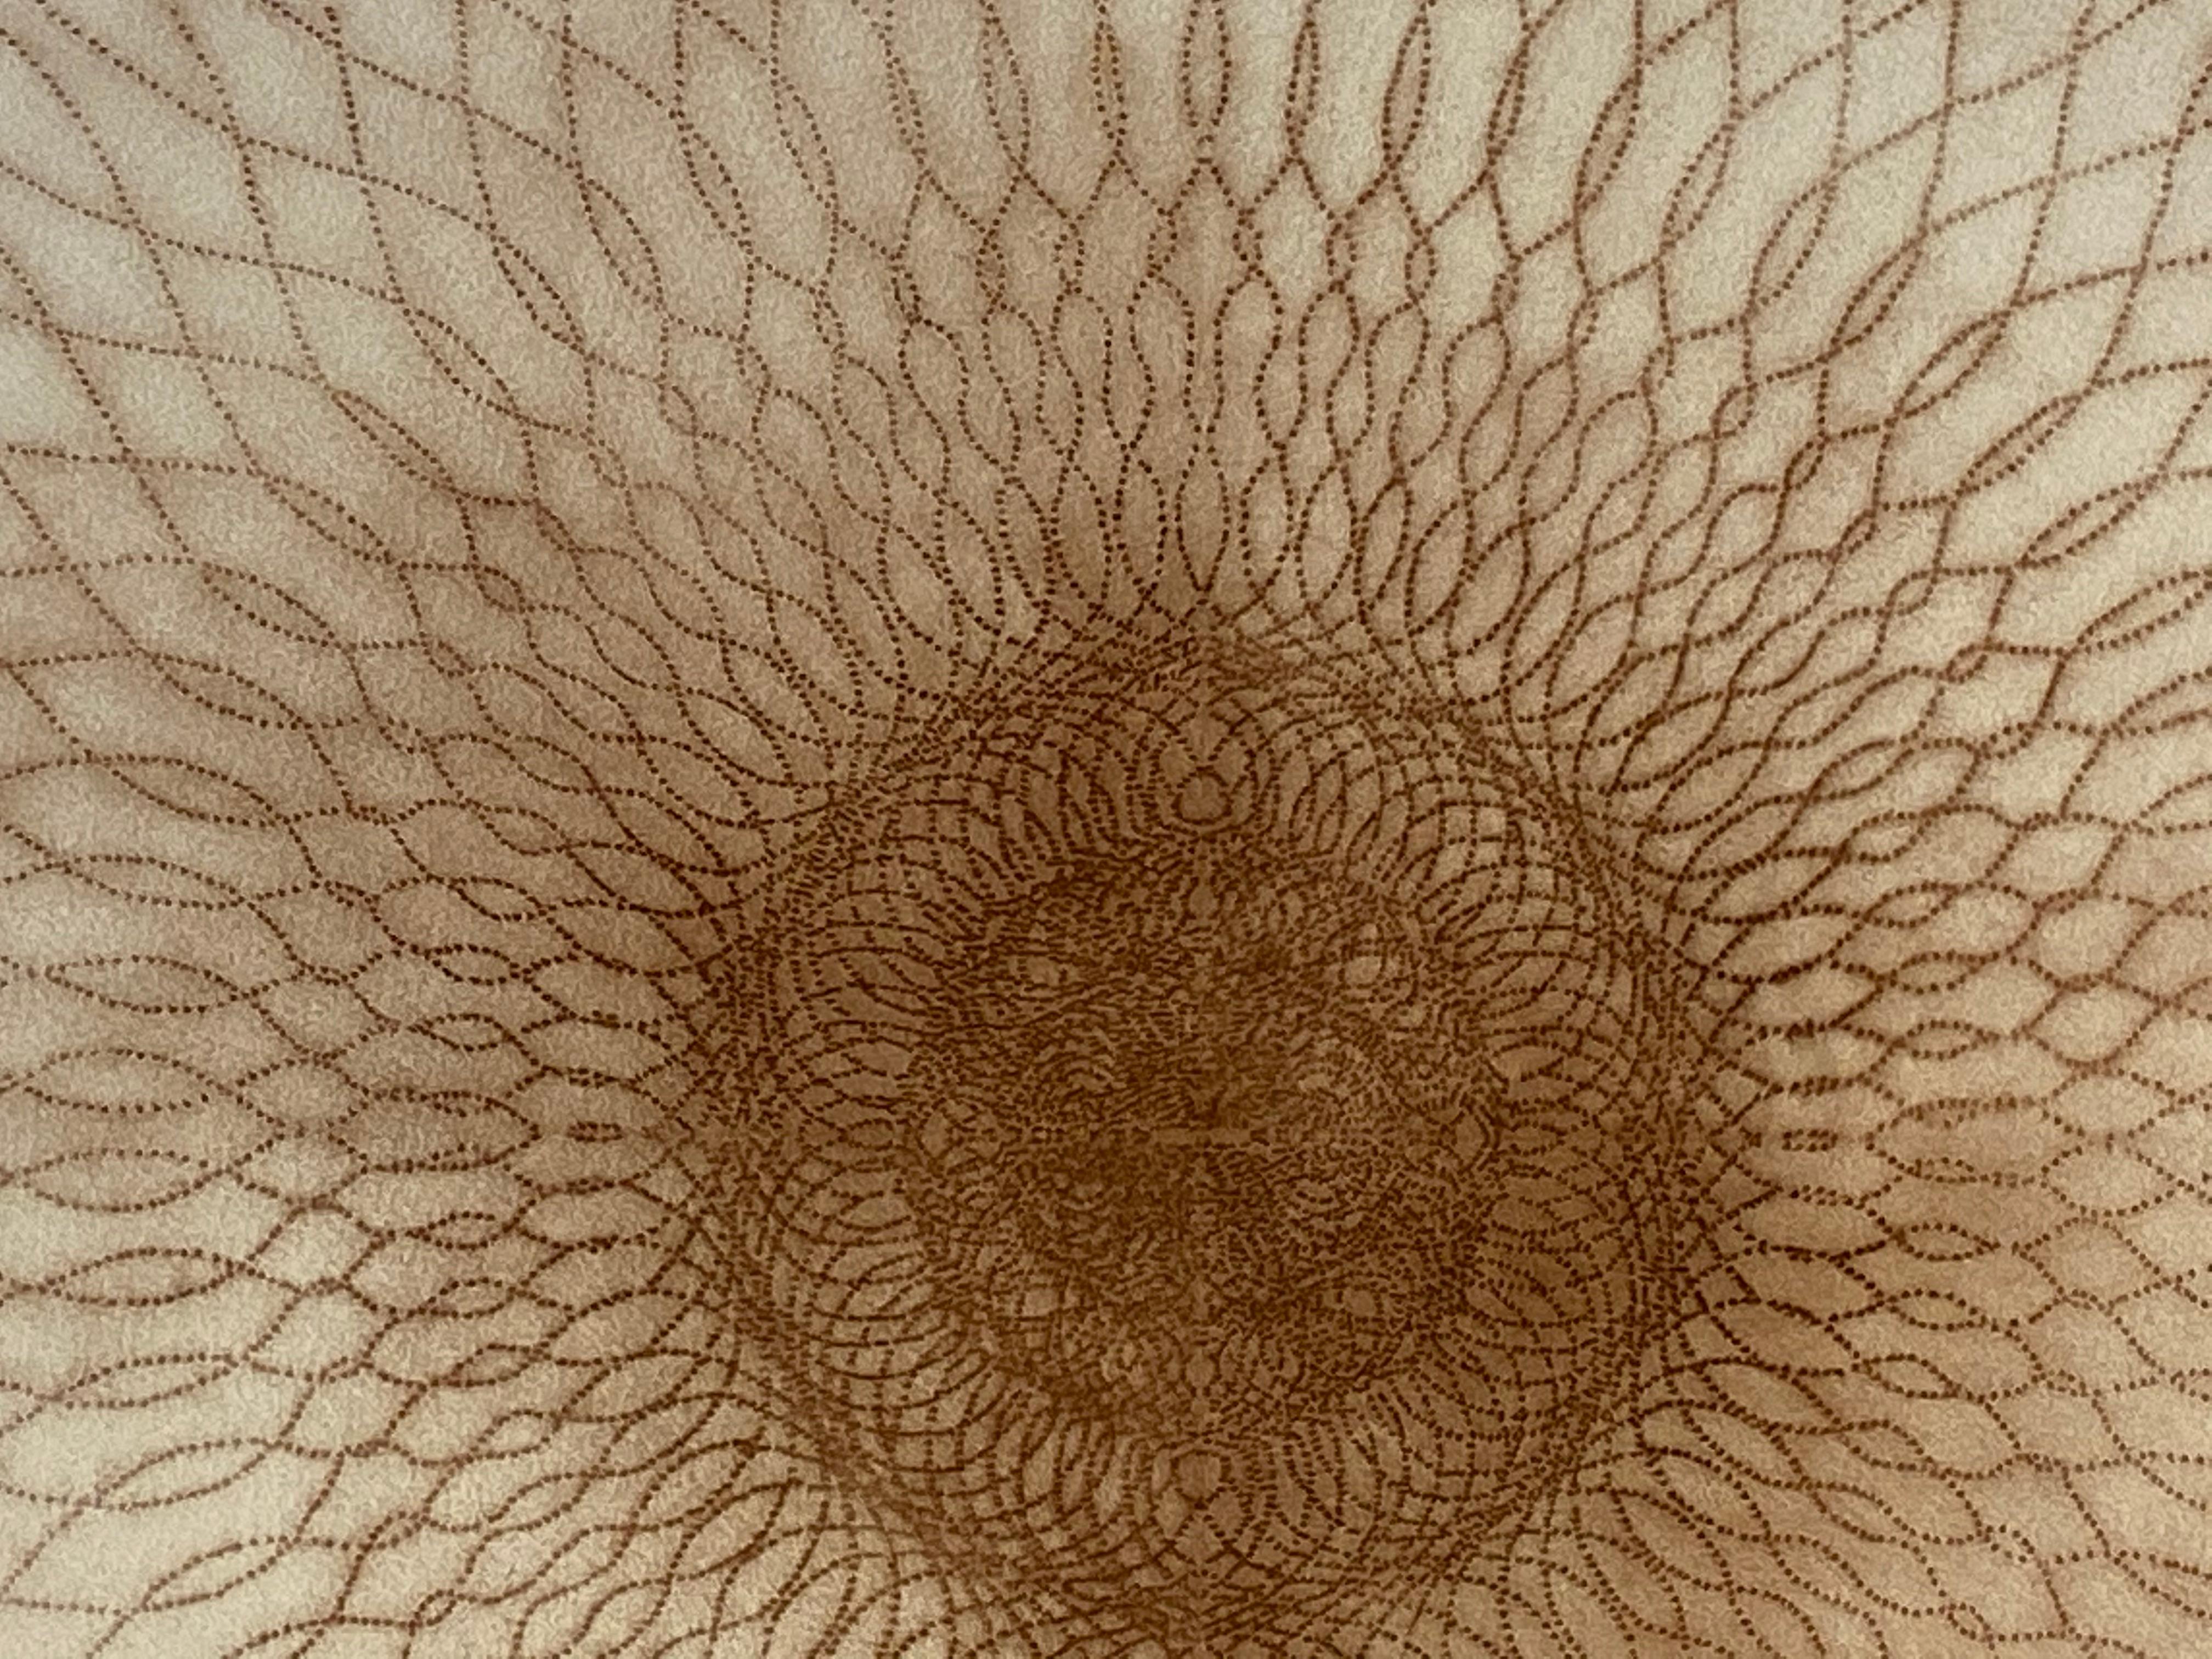 This reddish brown pigment drawing was made with a perforated stencil laid on ivory rag paper, pounced with a sack of powdered pigment. Pigment passes through leaving marks, patterns or dots that create an overall image. The version of this